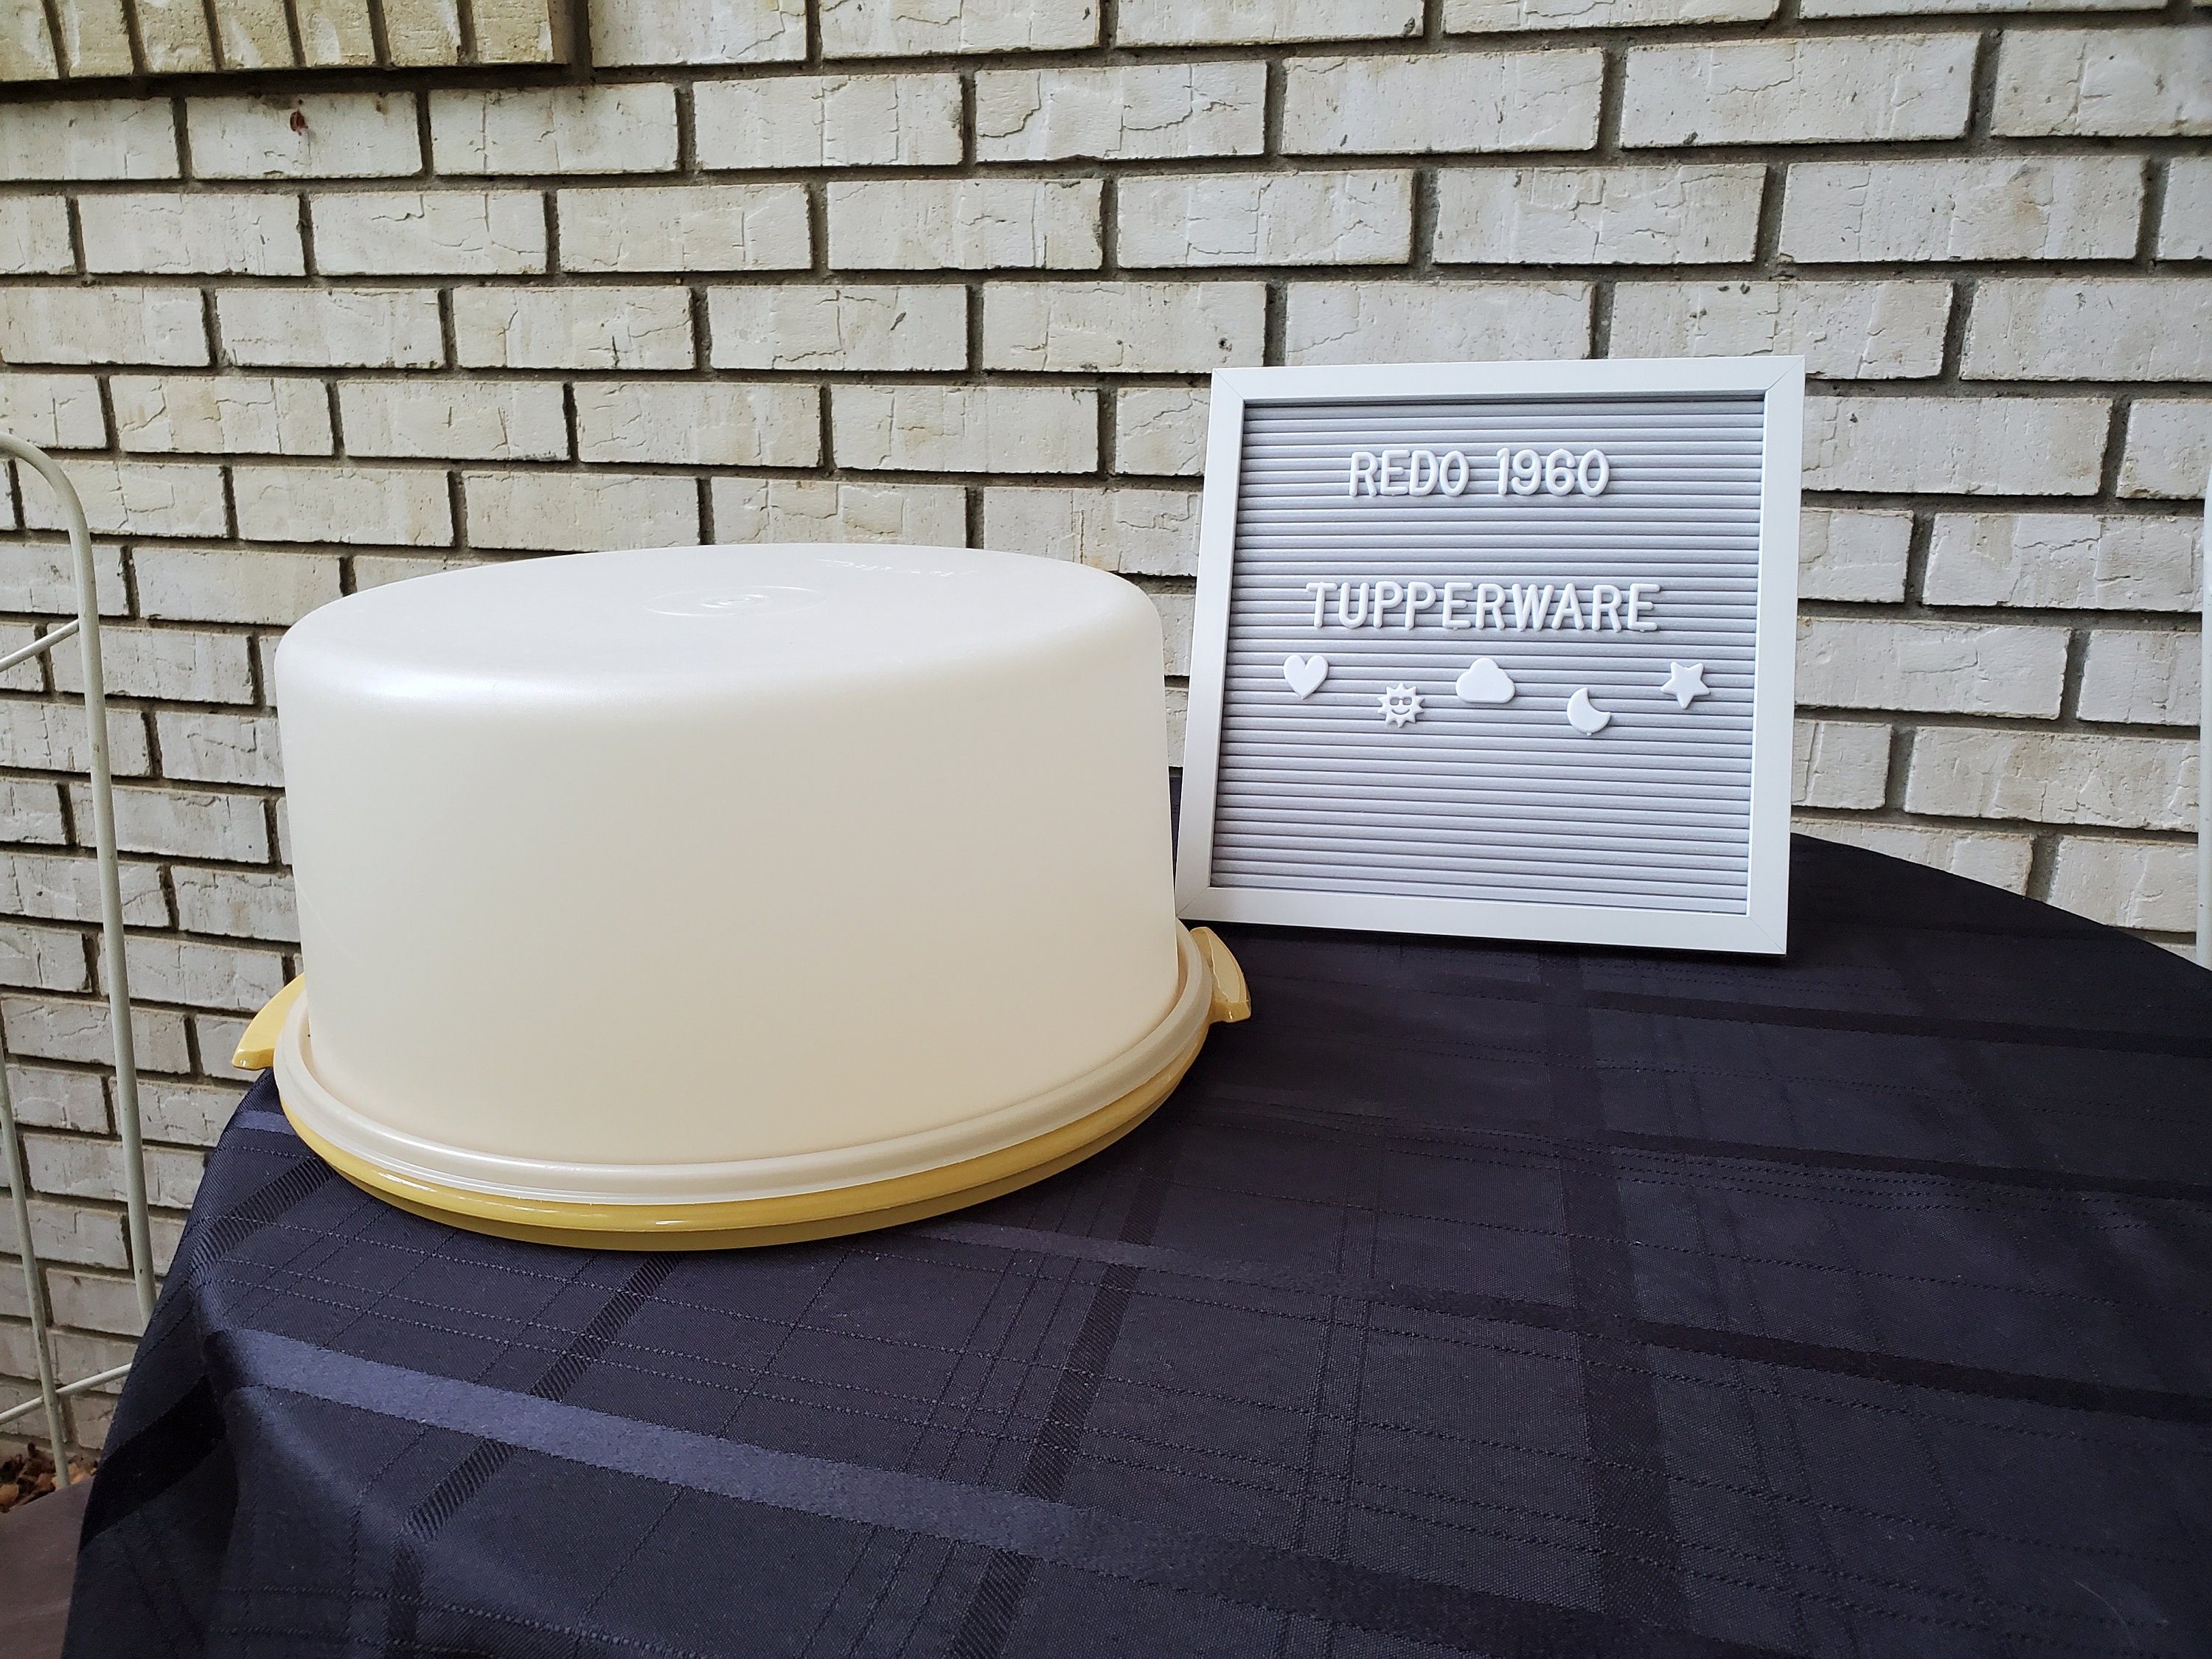 Tupperware, Kitchen, Vintage Tupperware Sheet Cake Container 6222 Gold  Base6232 Opaque Lidos